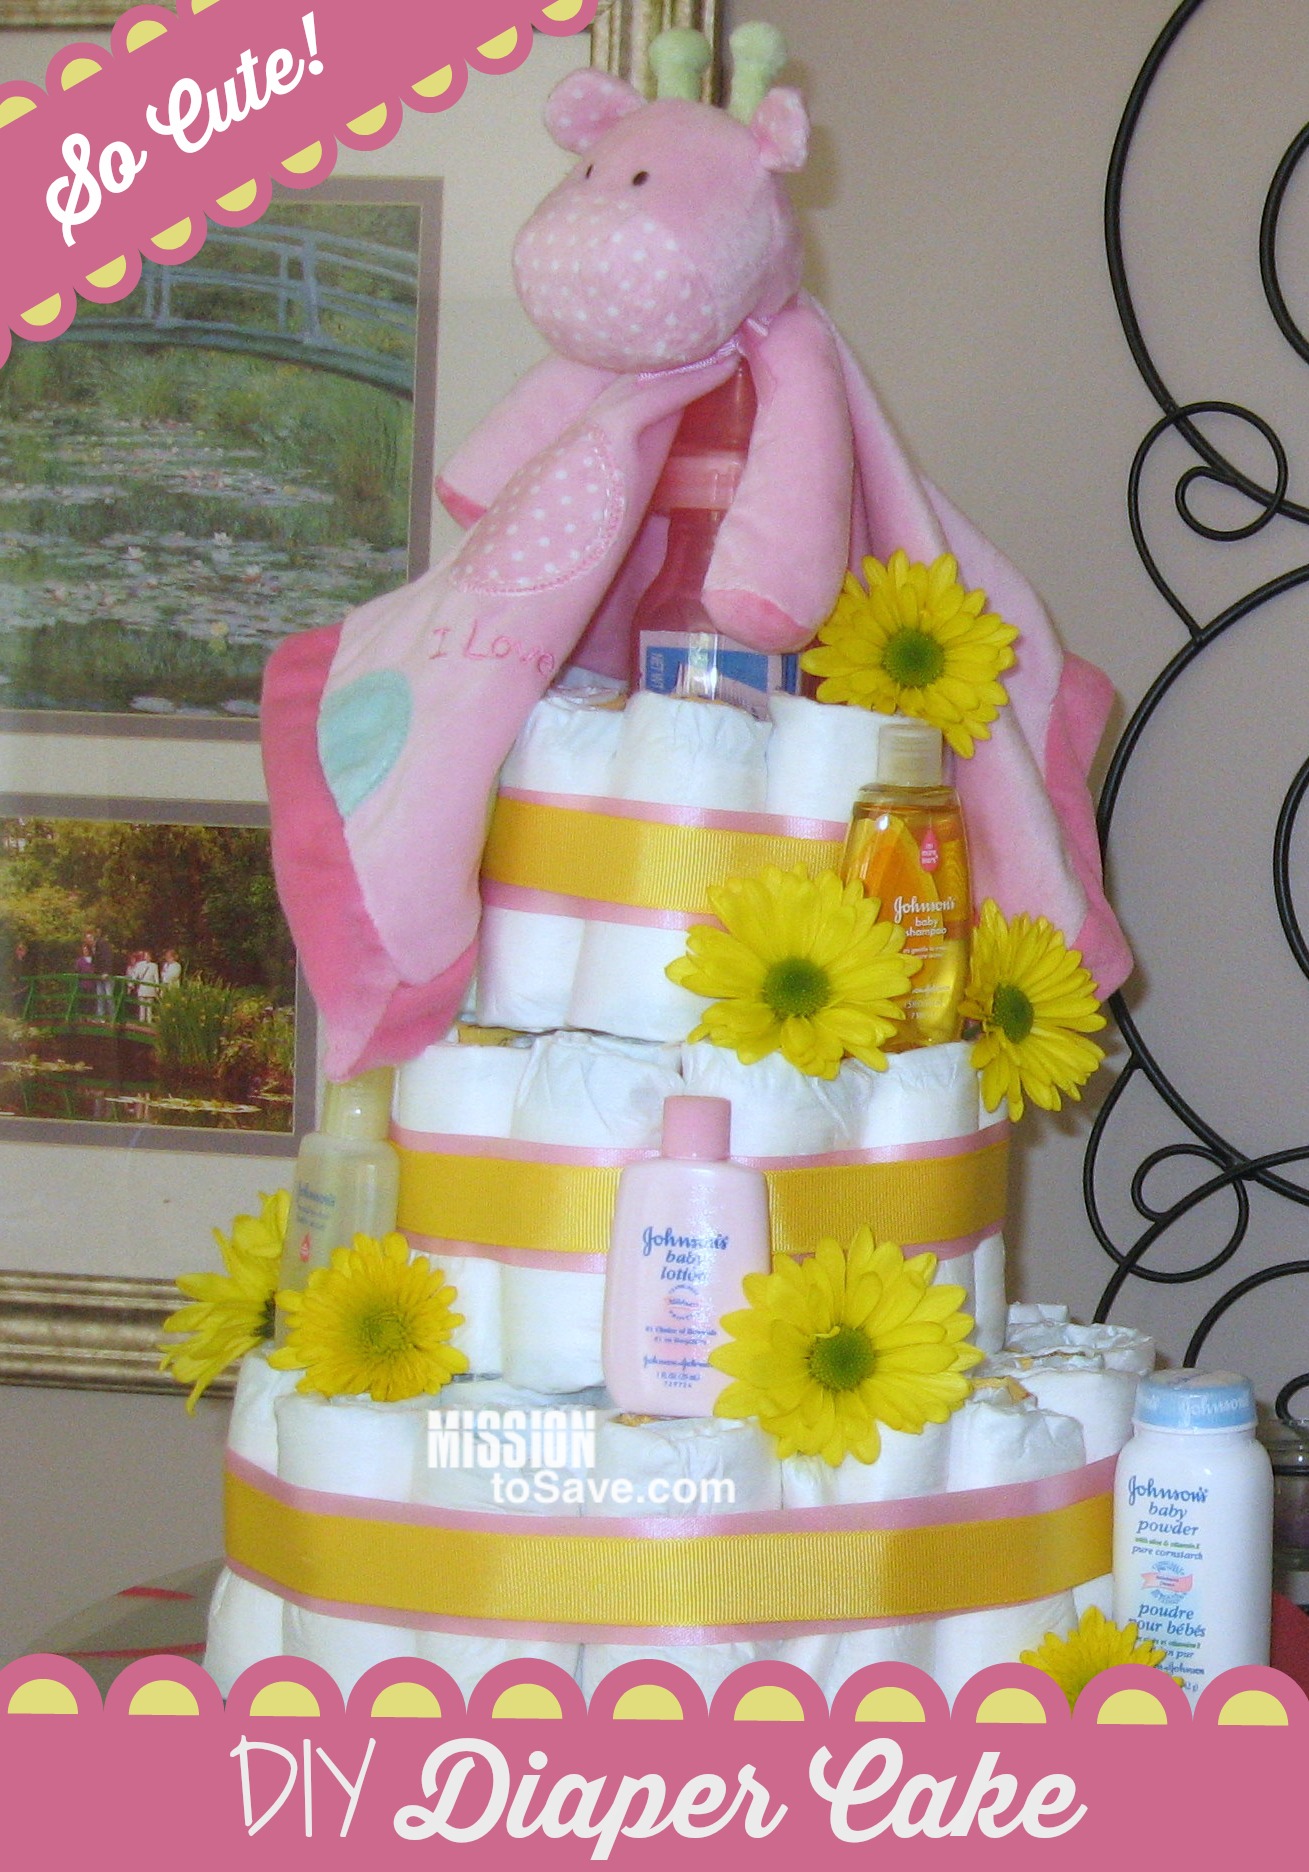 Adorable Diaper Cake for DIY Baby Shower Gift - Mission: to Save